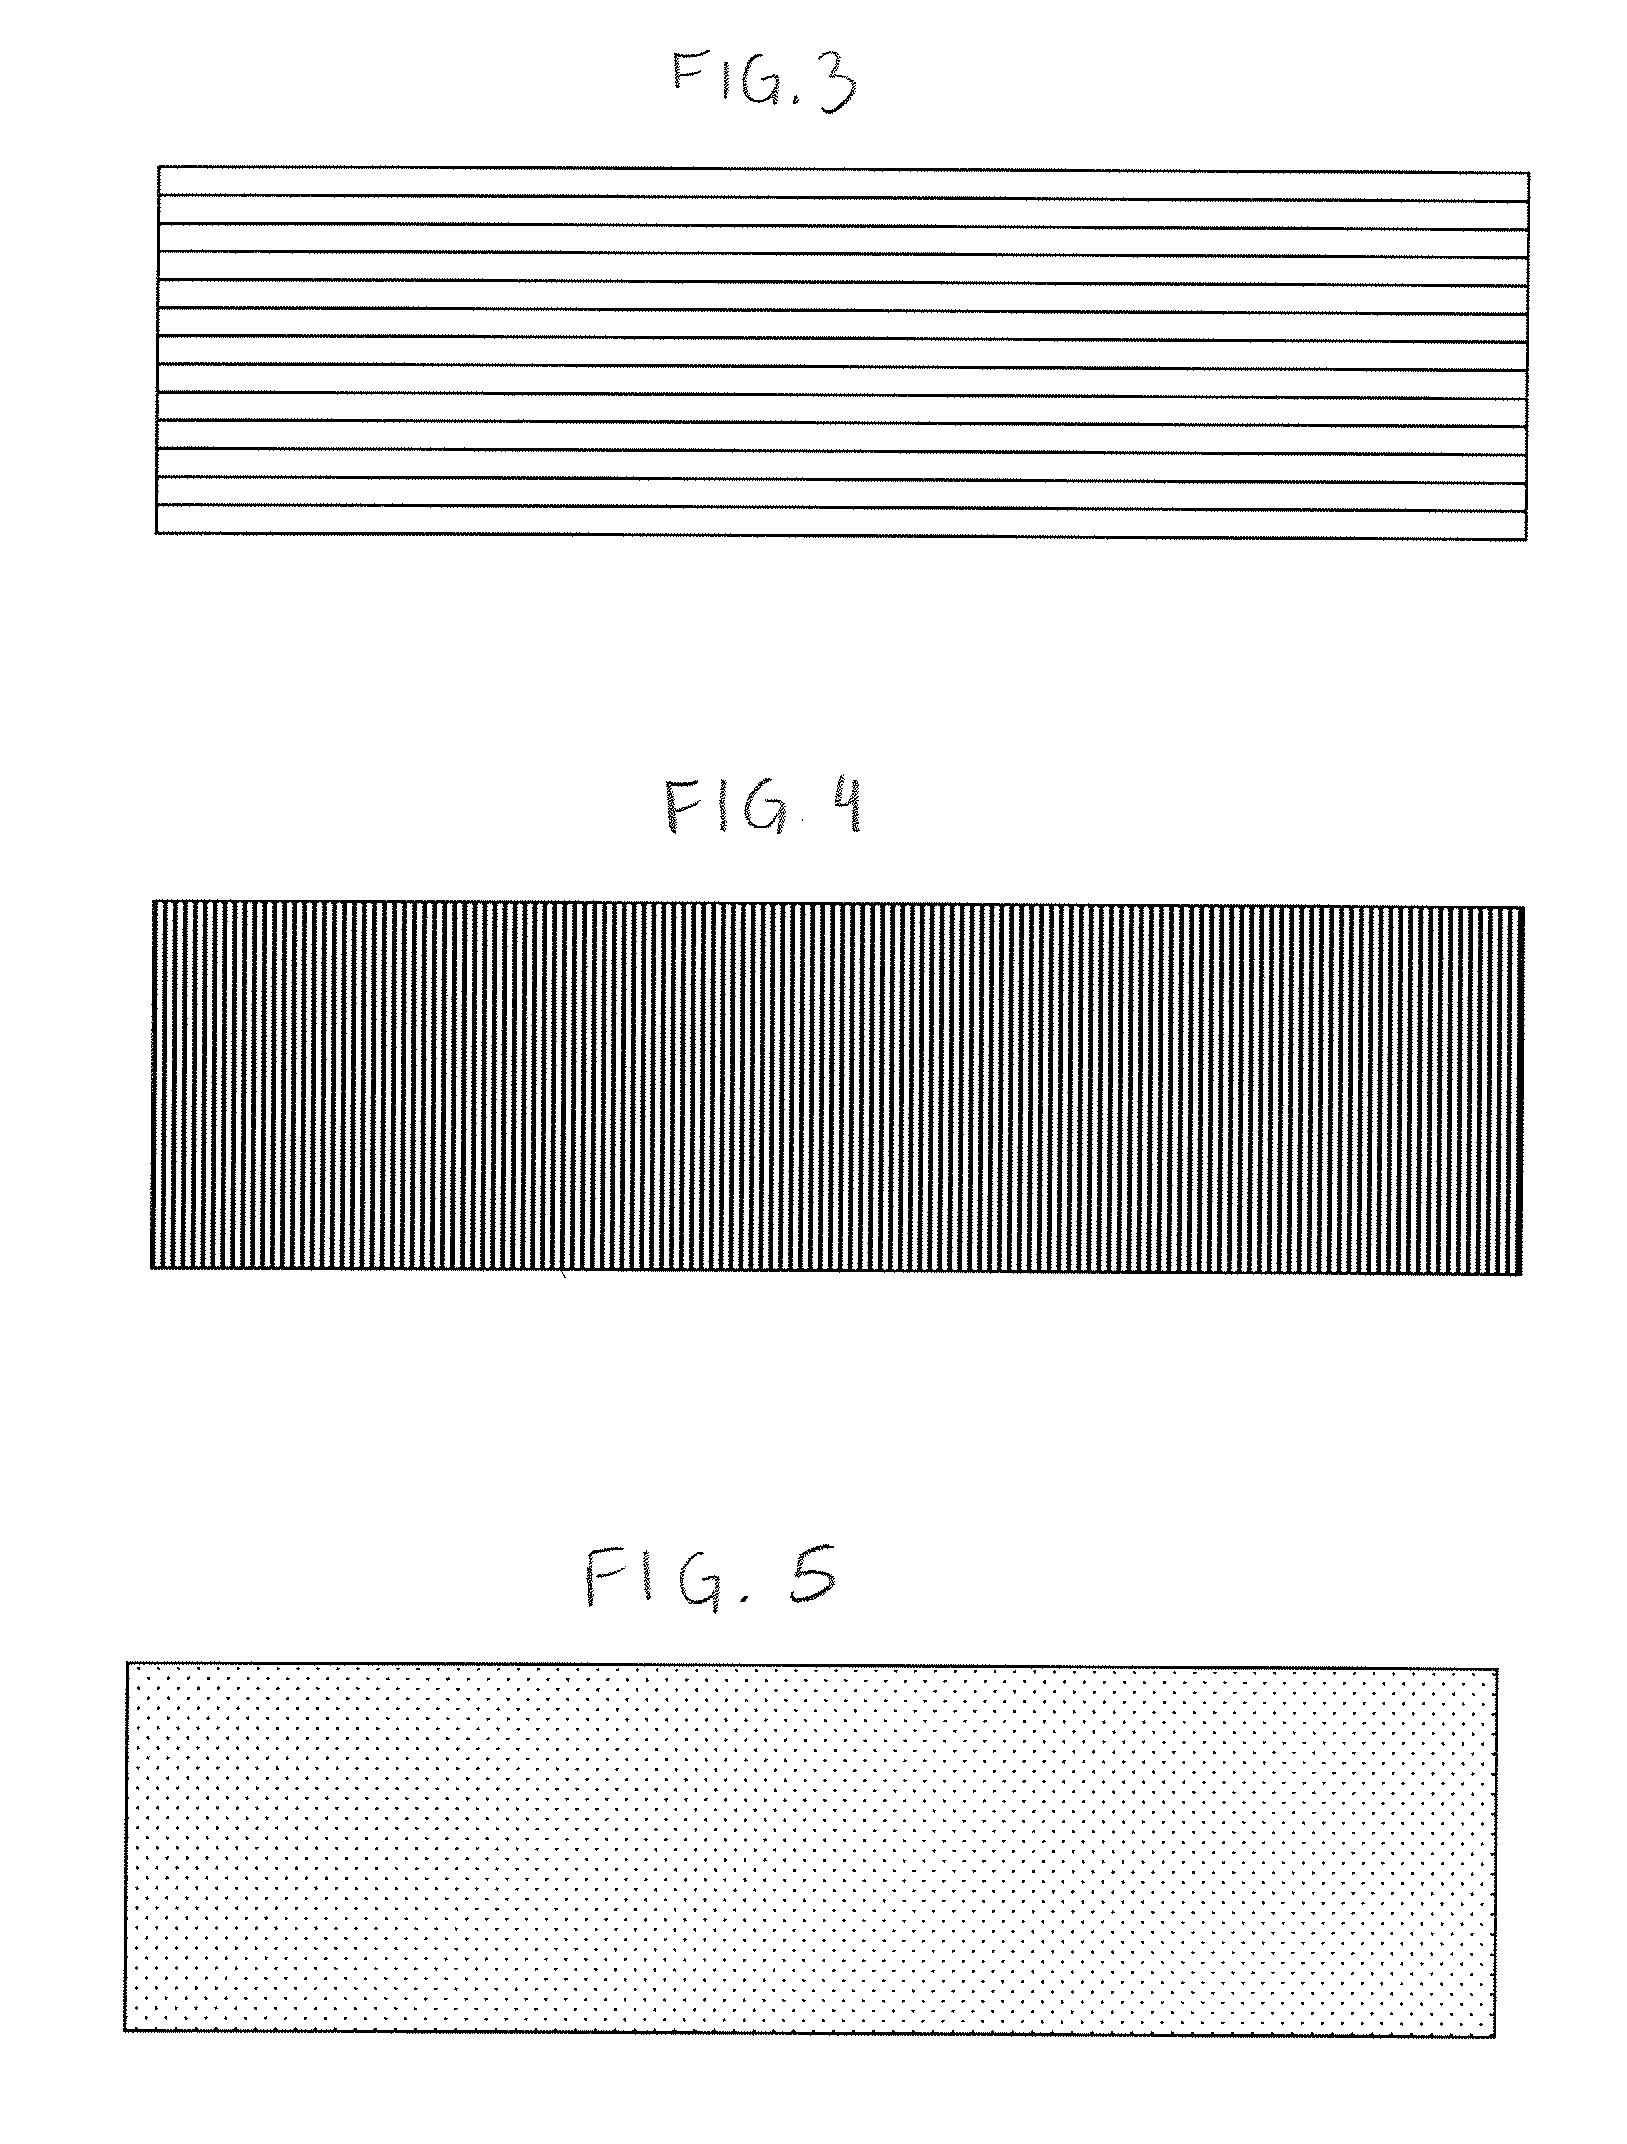 Patterned mold for medical device